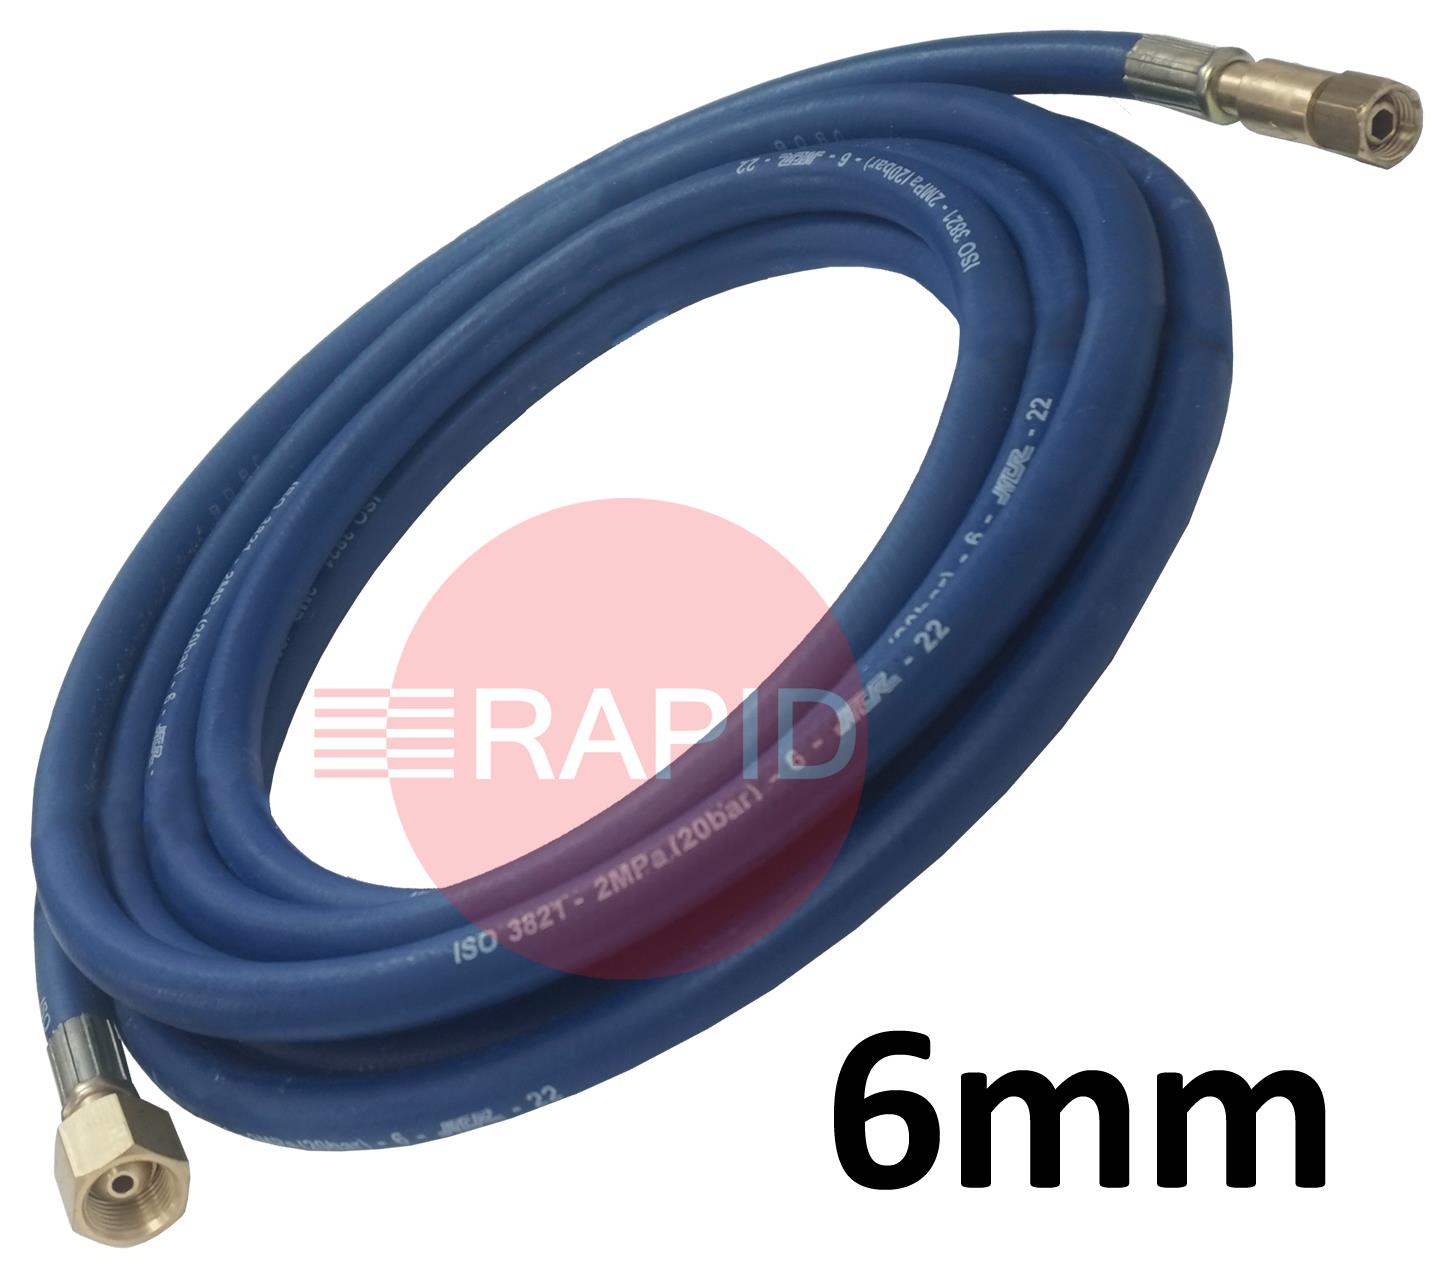 OXYLTHOSE6MM  Fitted Oxygen Hose. 6mm Bore. G1/4 Check Valve & G3/8 Regulator Connection